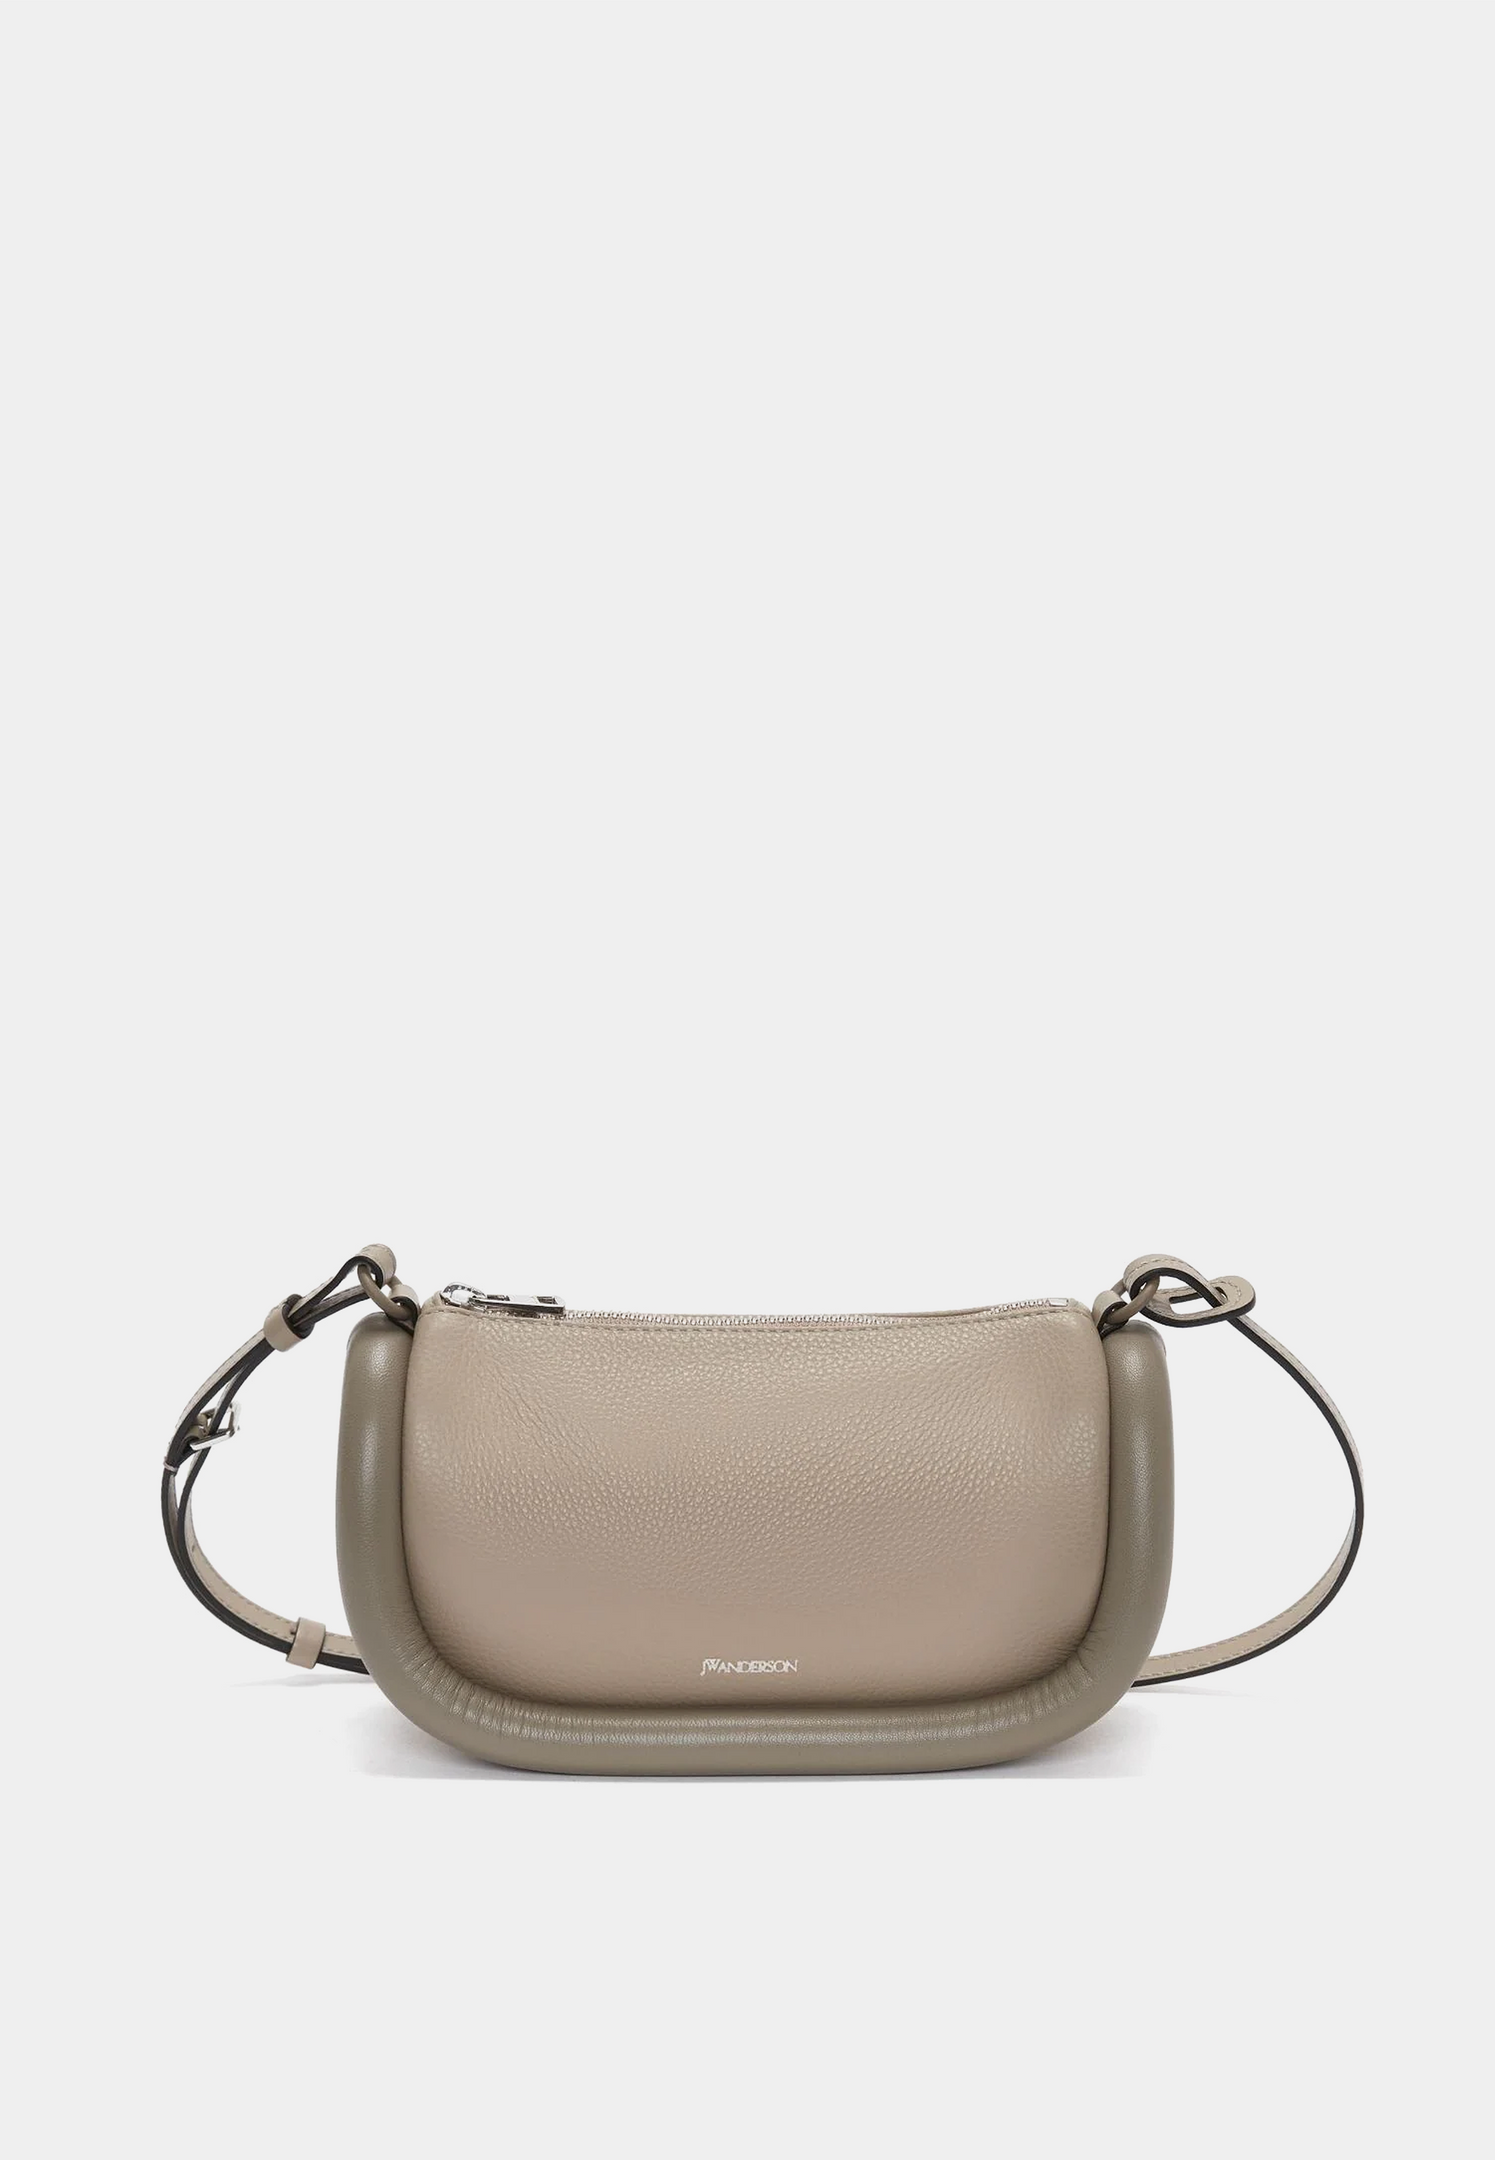 Jw Anderson The Bumper-12 Taupe